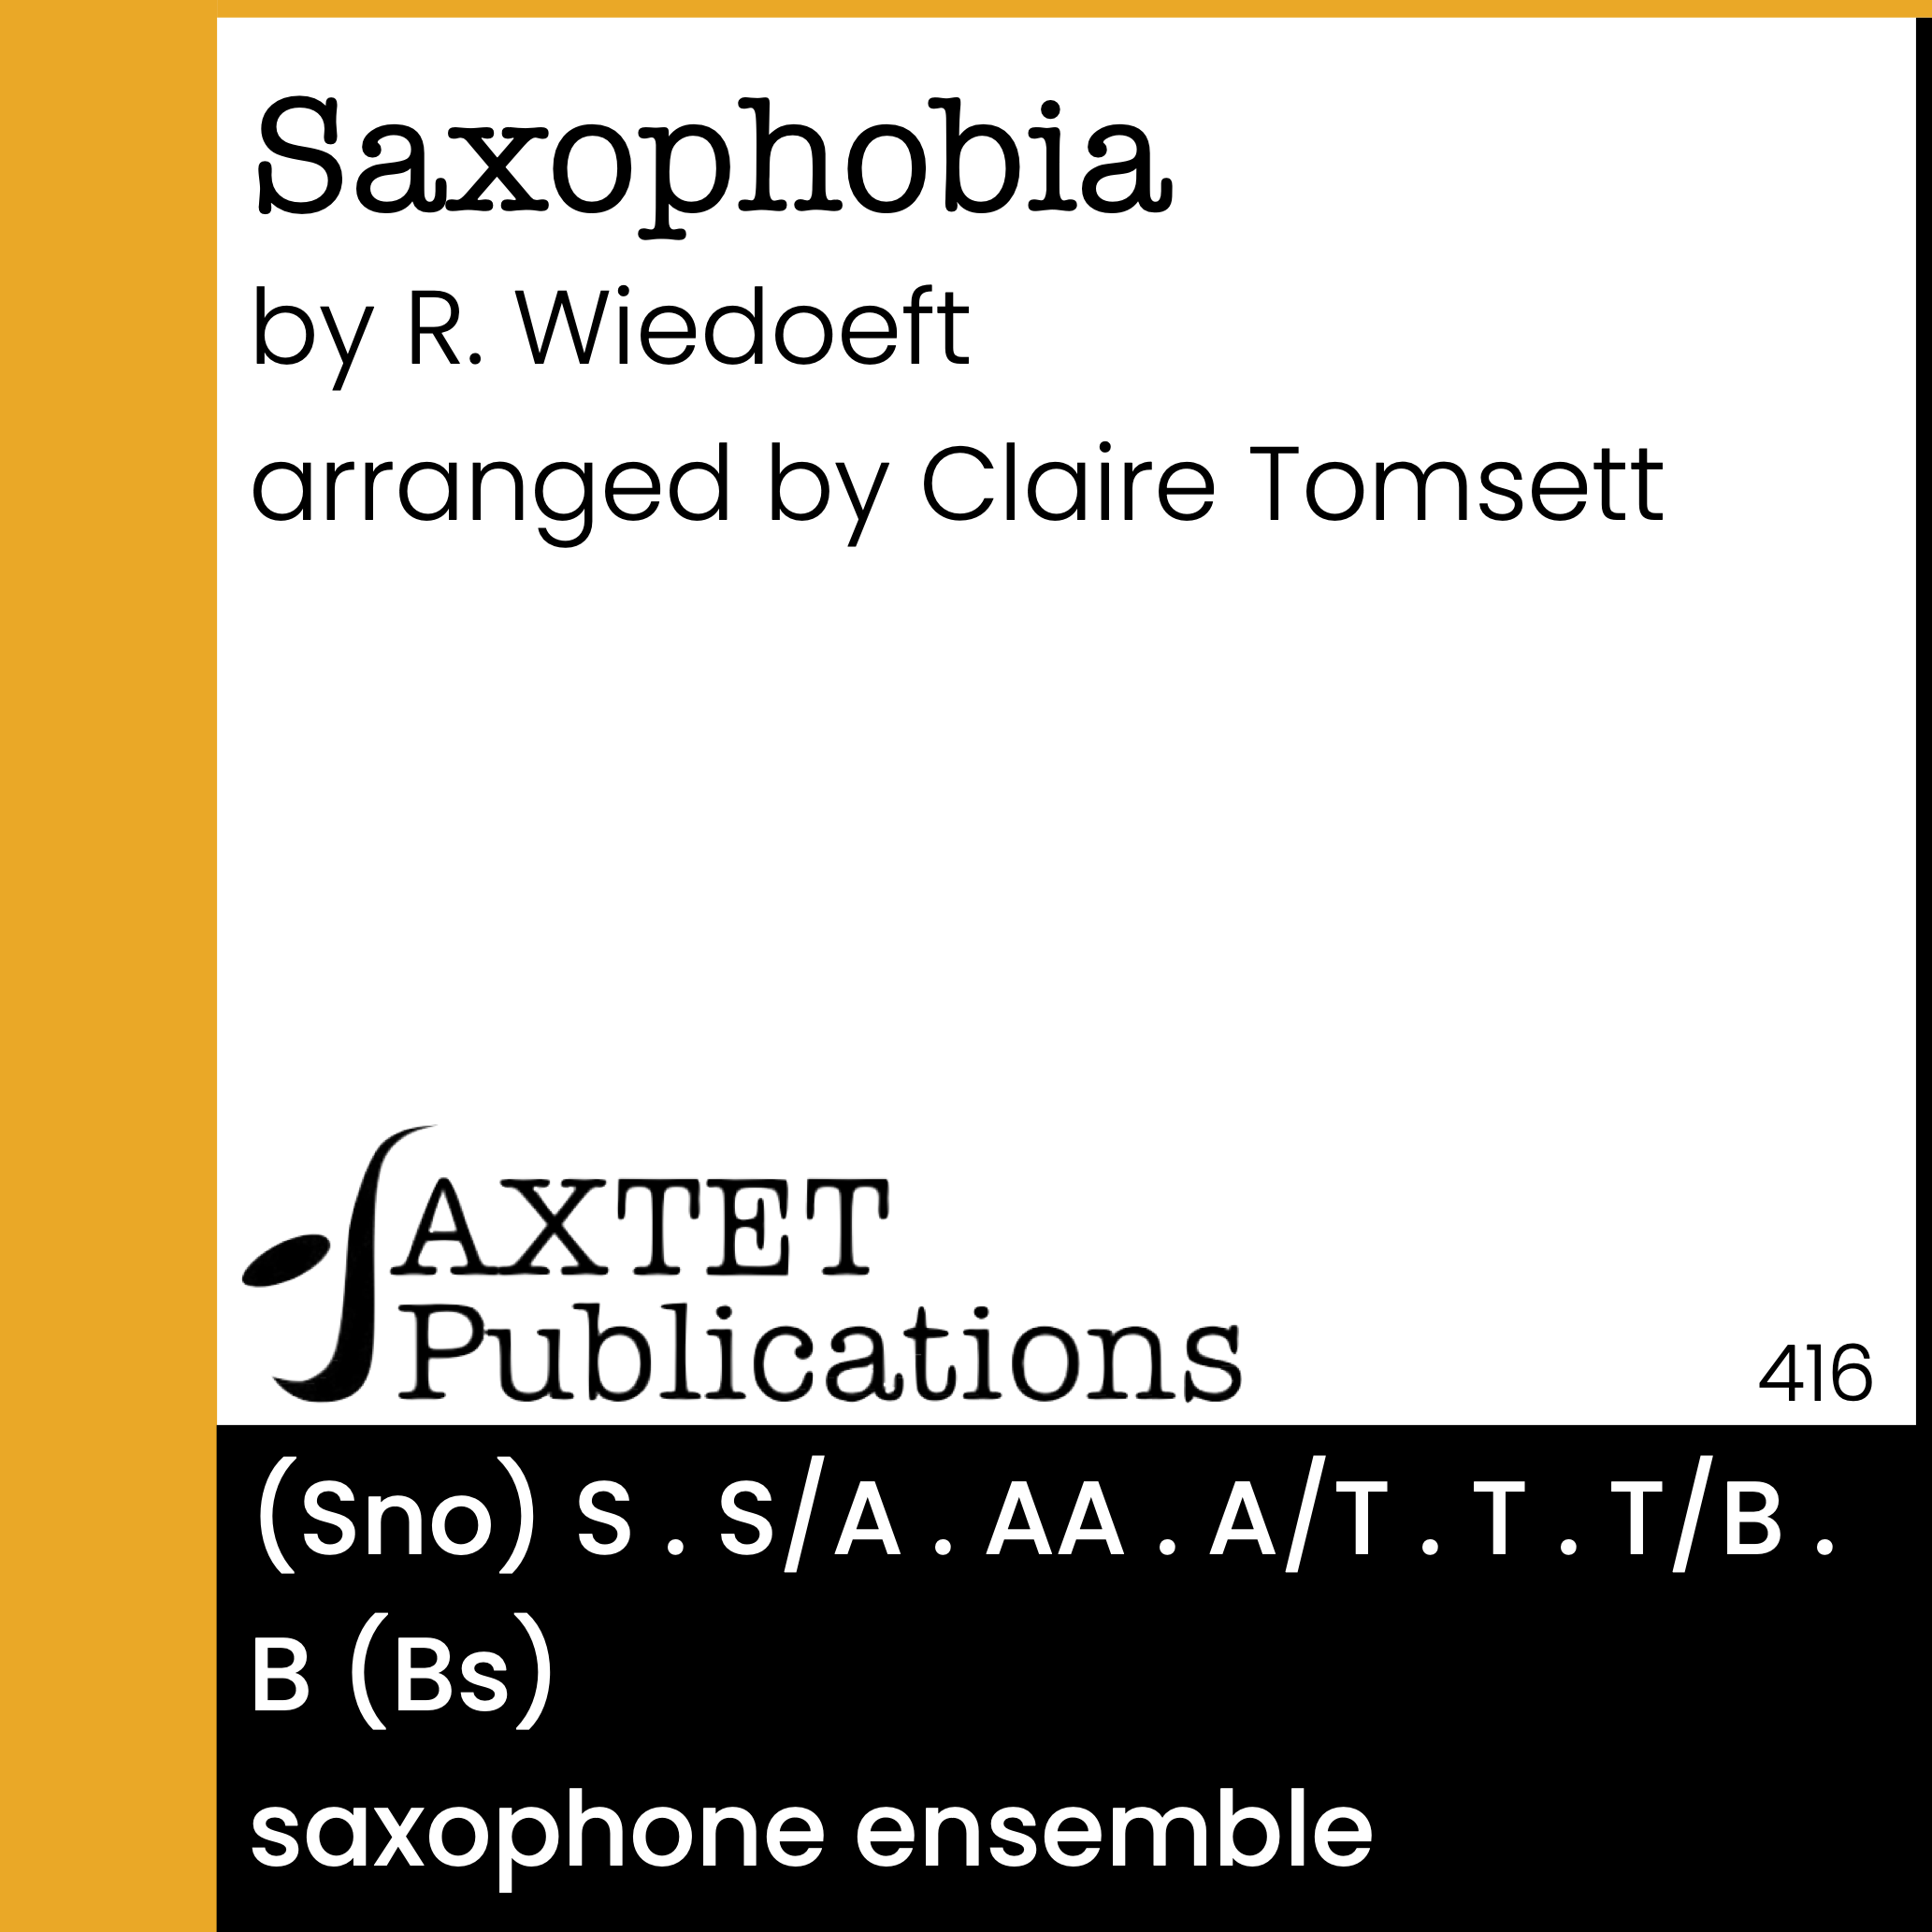 Cover of Saxophobia for Sax Ensemble by Rudy Wiedoeft